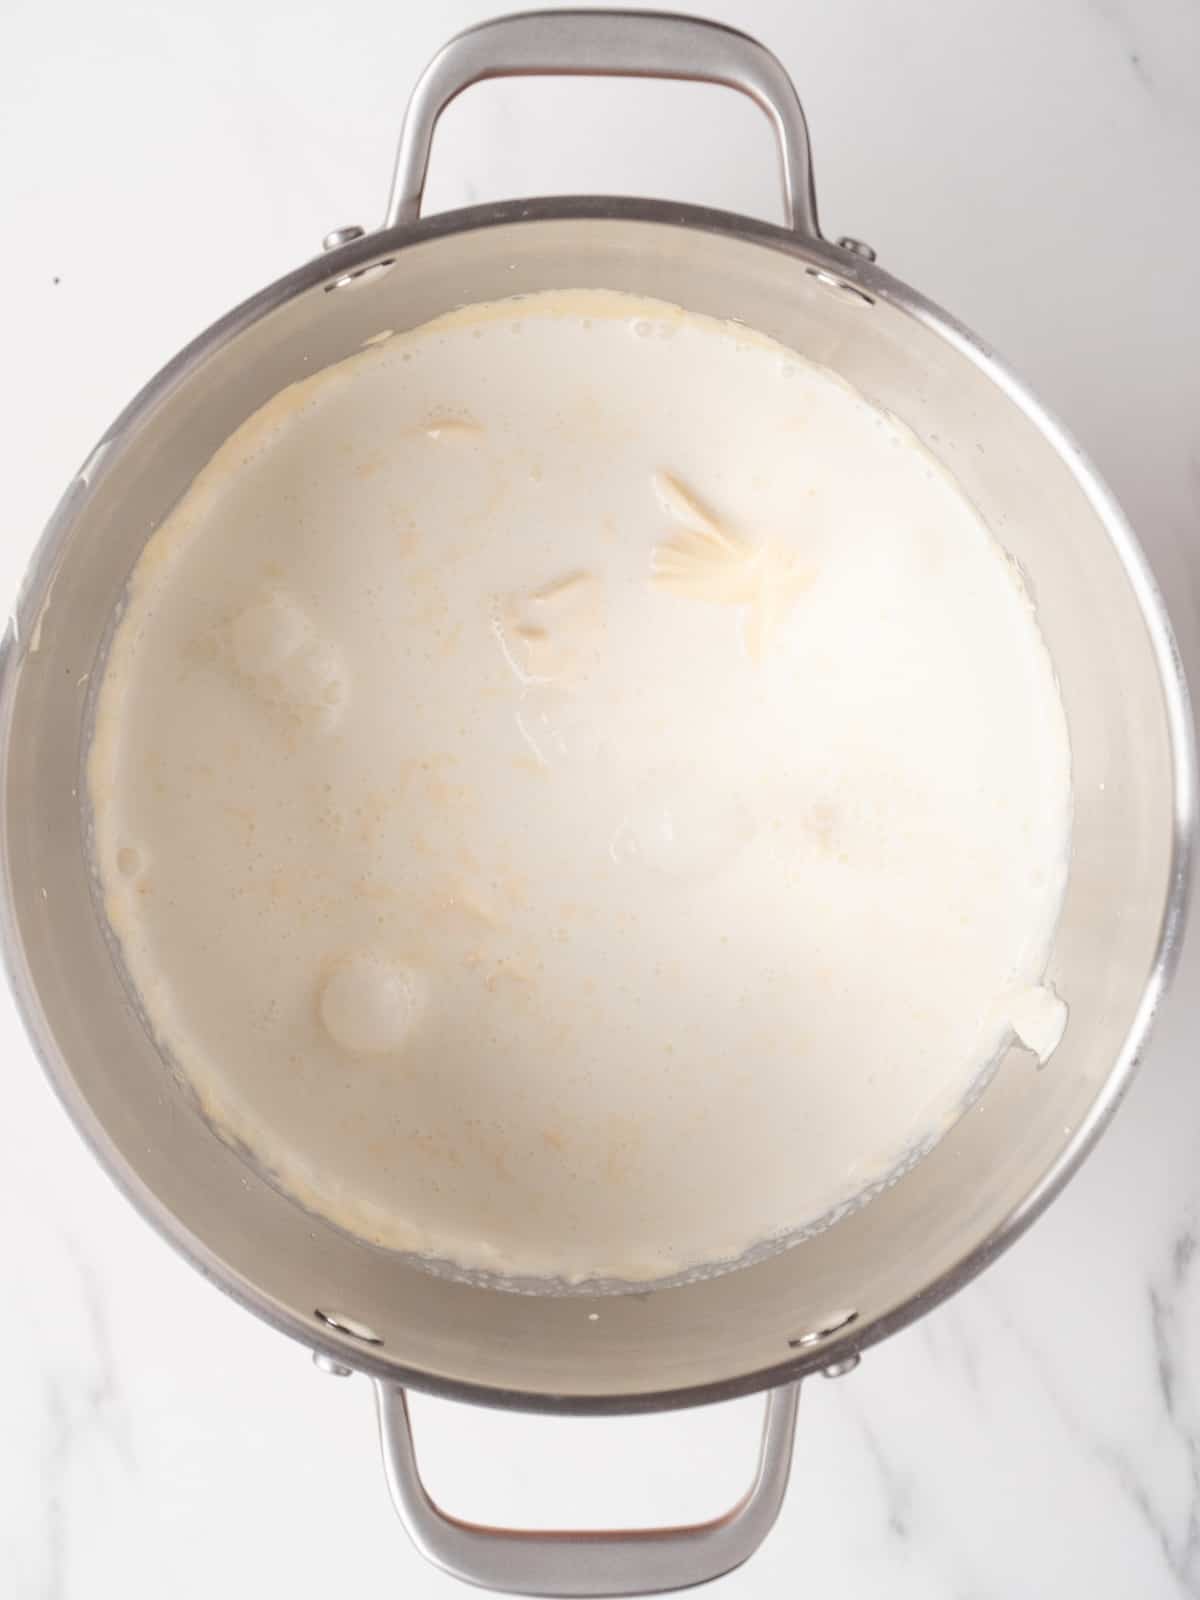 A stand mixer bowl with chilled cream added to the egg-yolk, sugar and mascarpone mixture.